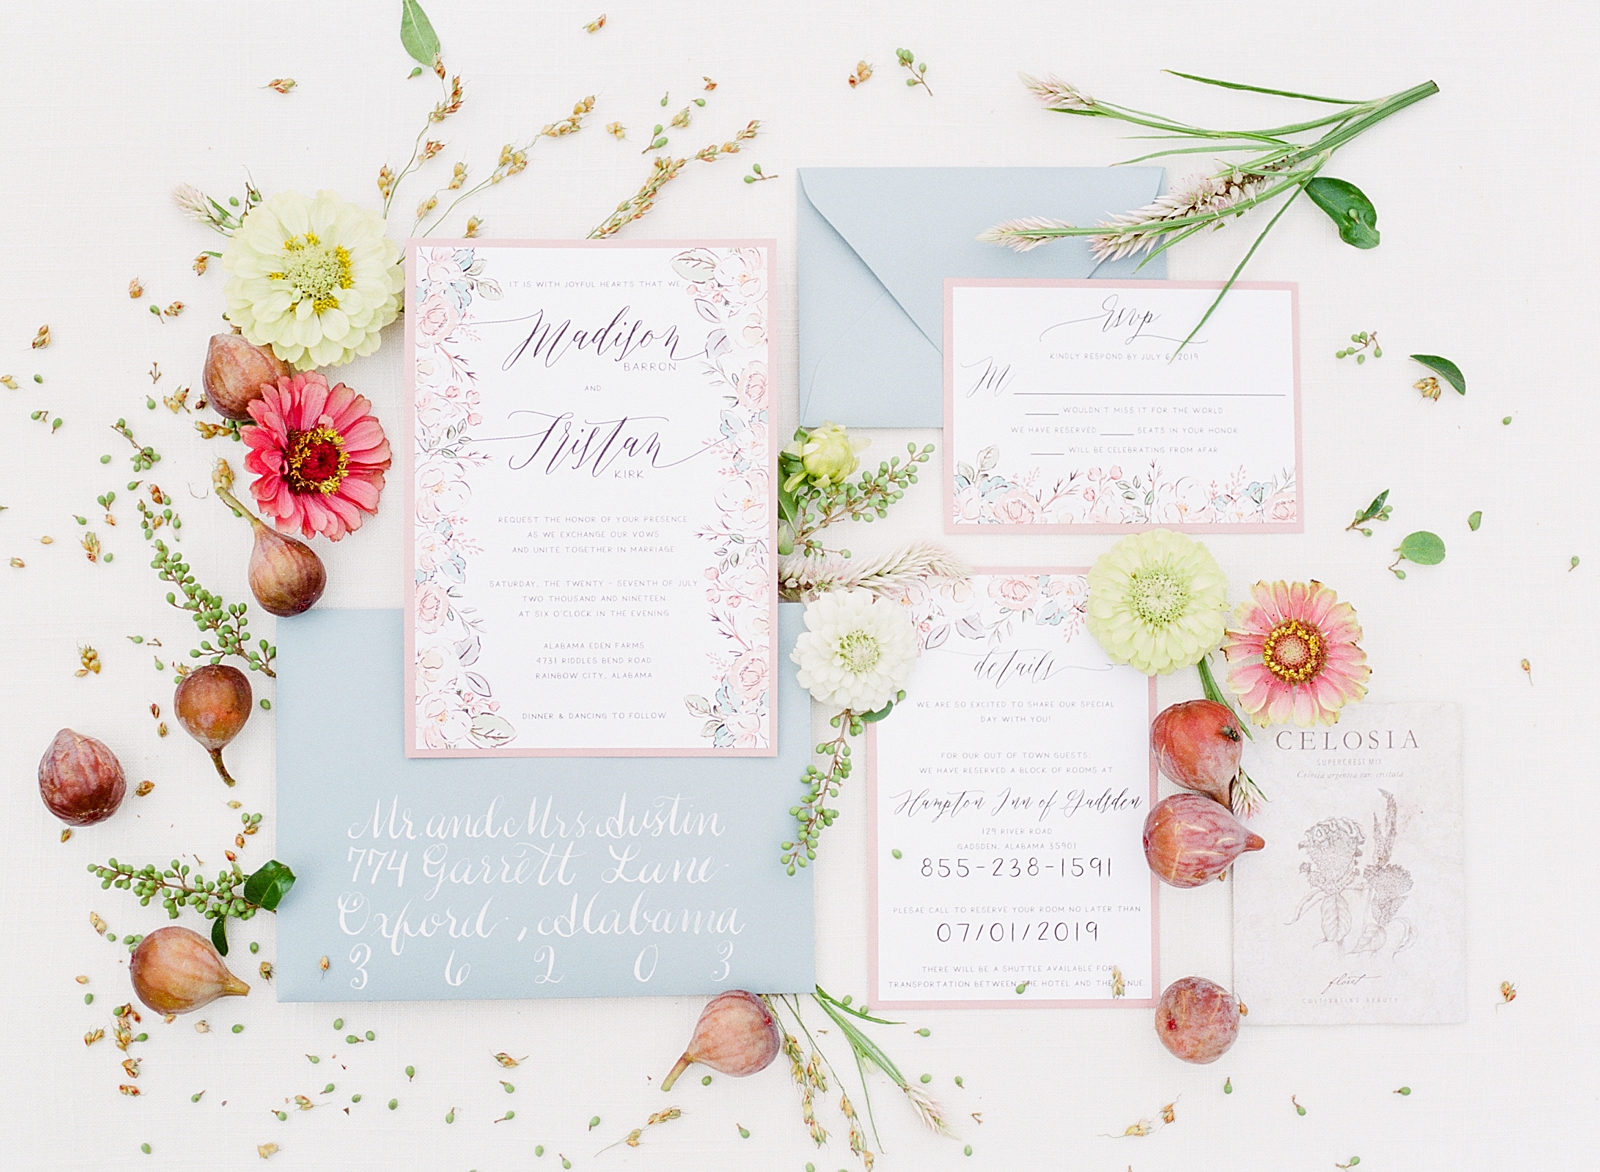 Birmingham Wedding Invitation Suite With Flowers and Figs Photo